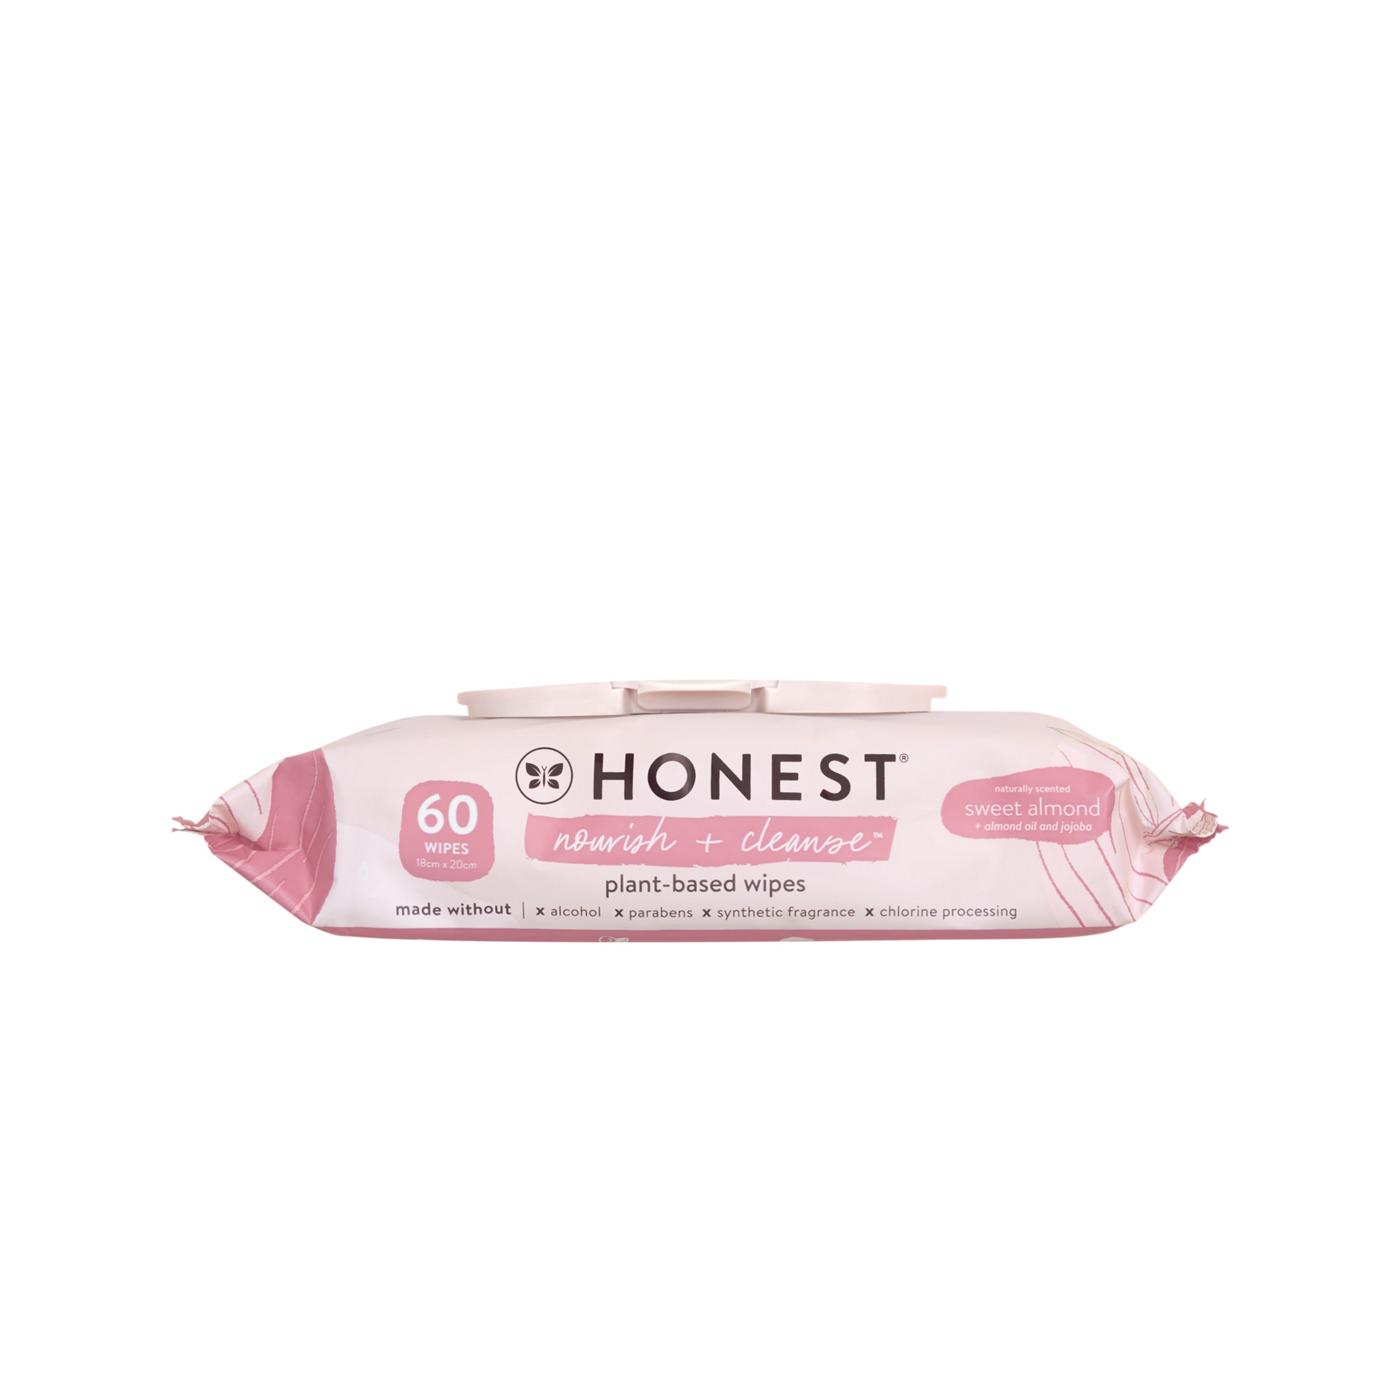 The Honest Company Nourish & Cleanse Baby Wipes; image 4 of 4